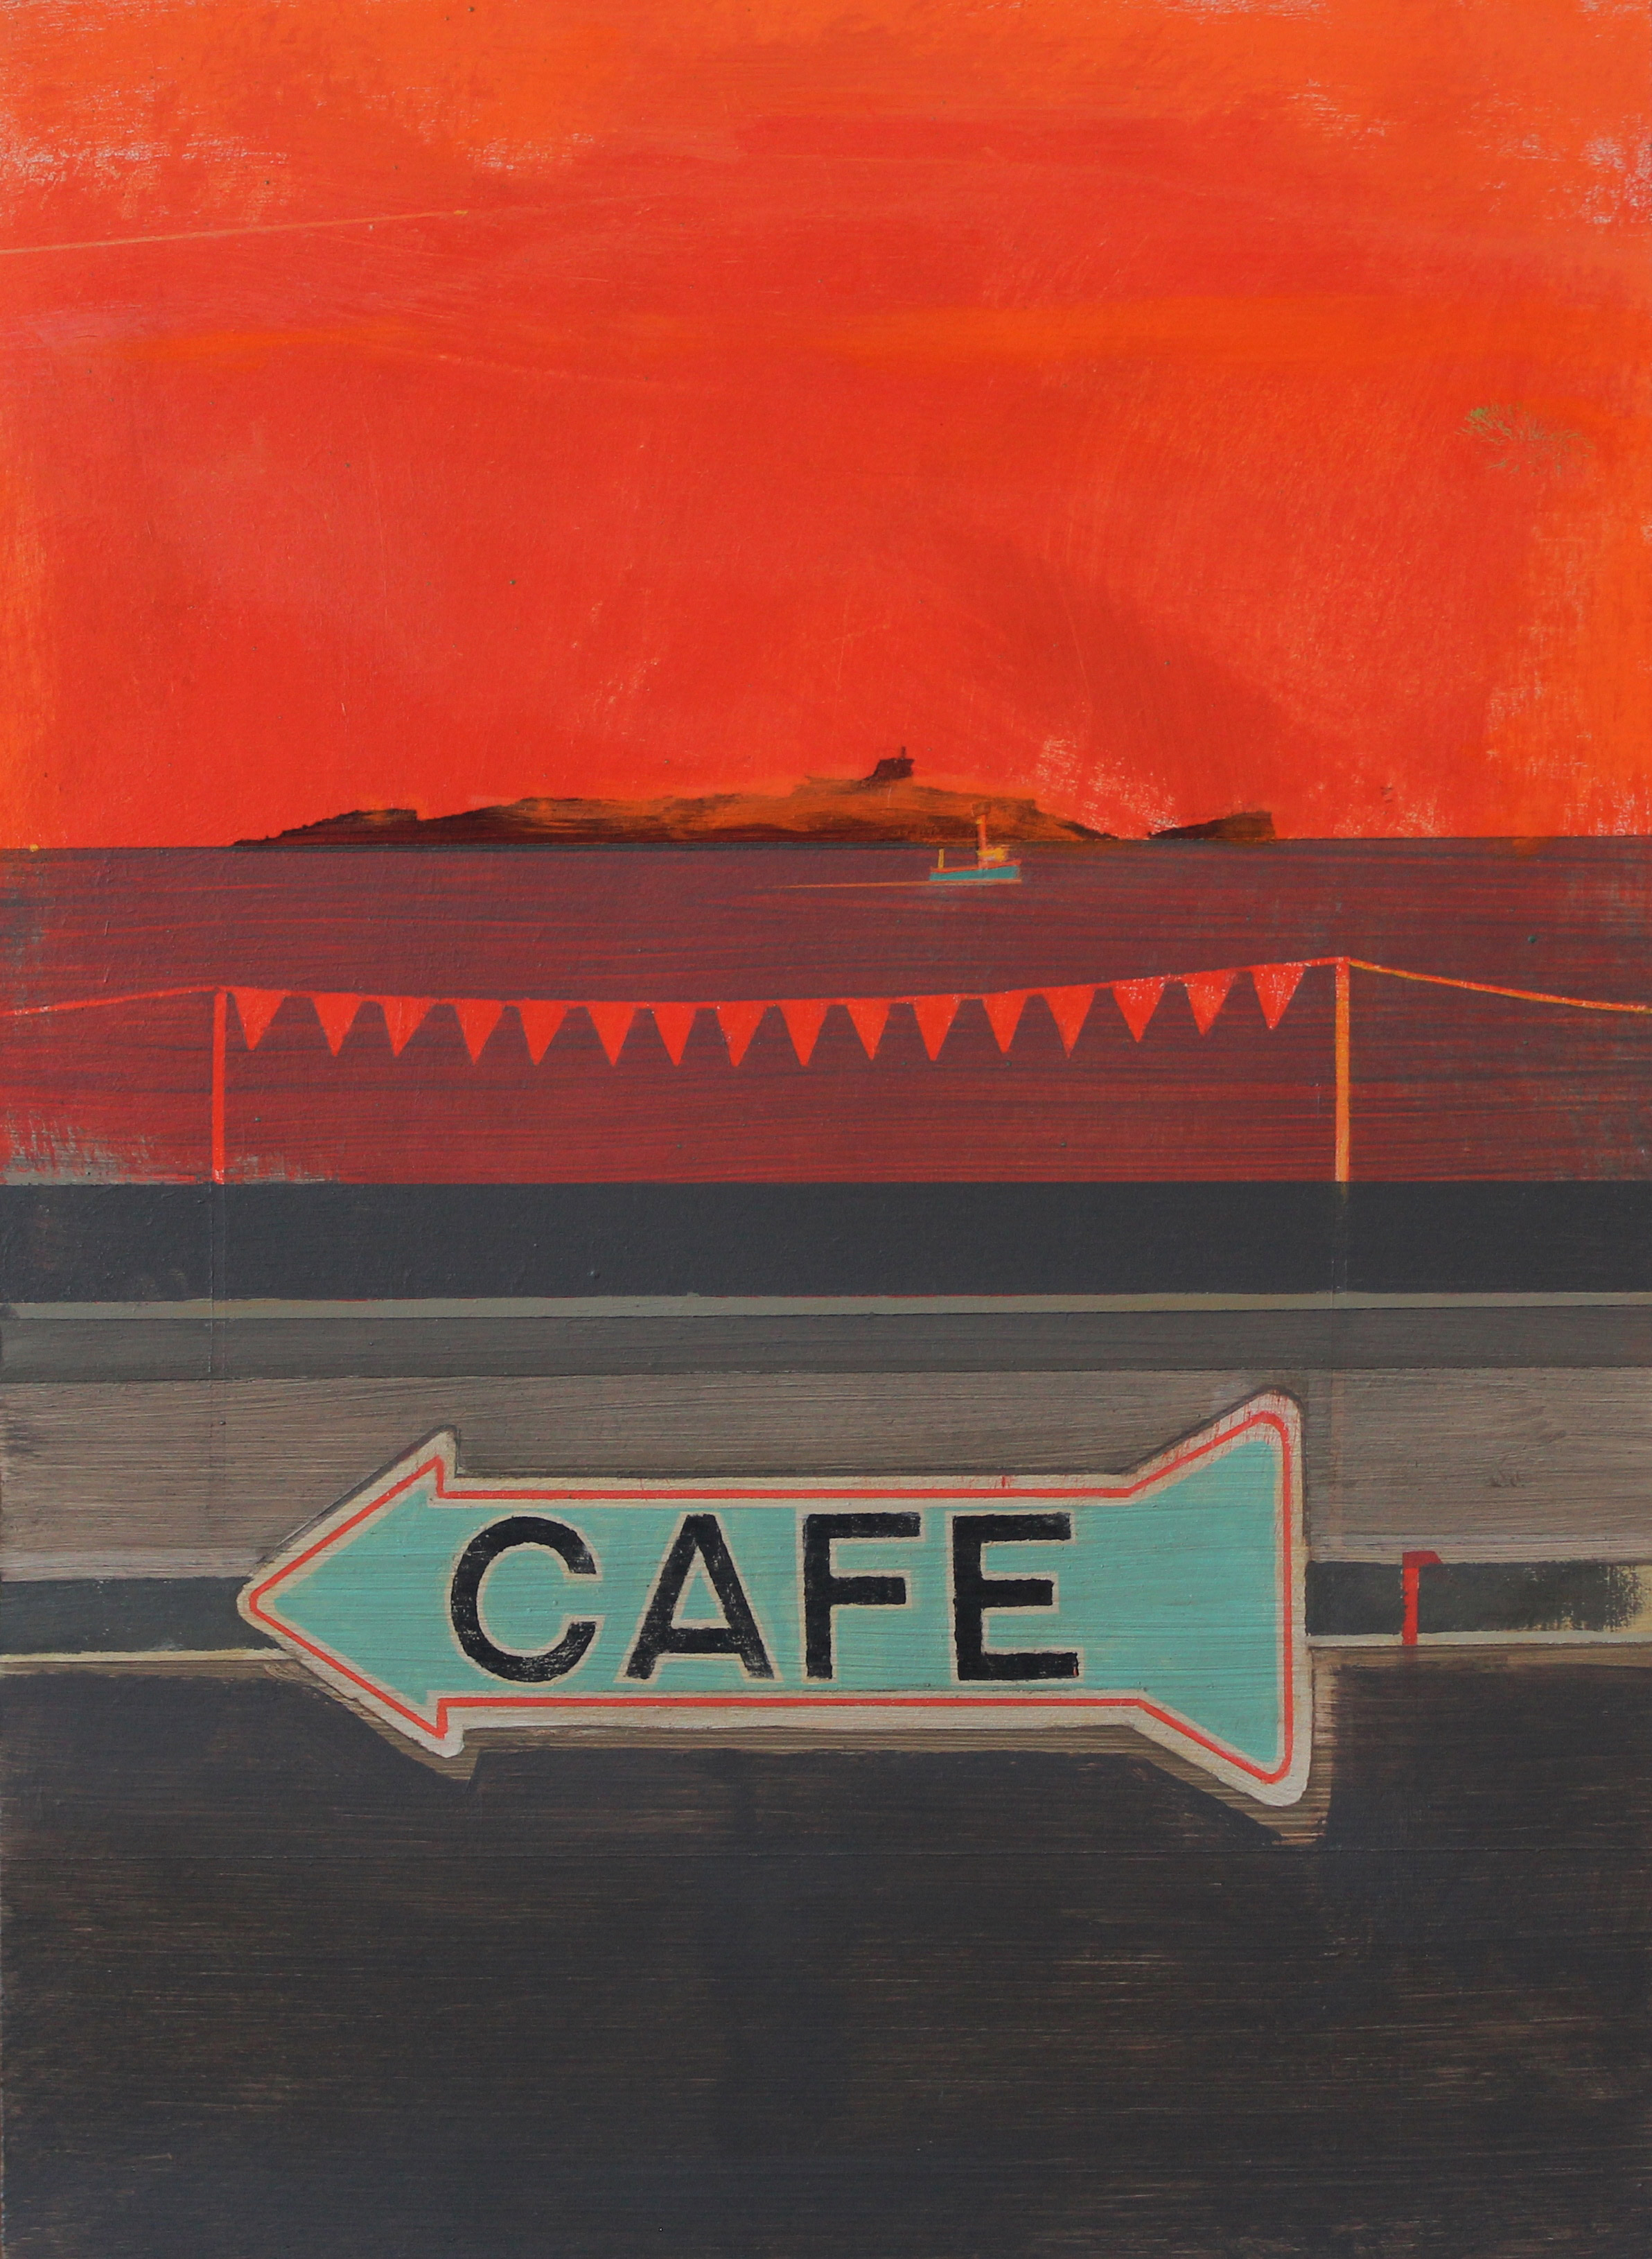 Cafe sign at sunset, Mousehole, 35x25 cm, acrylic on board, £695.